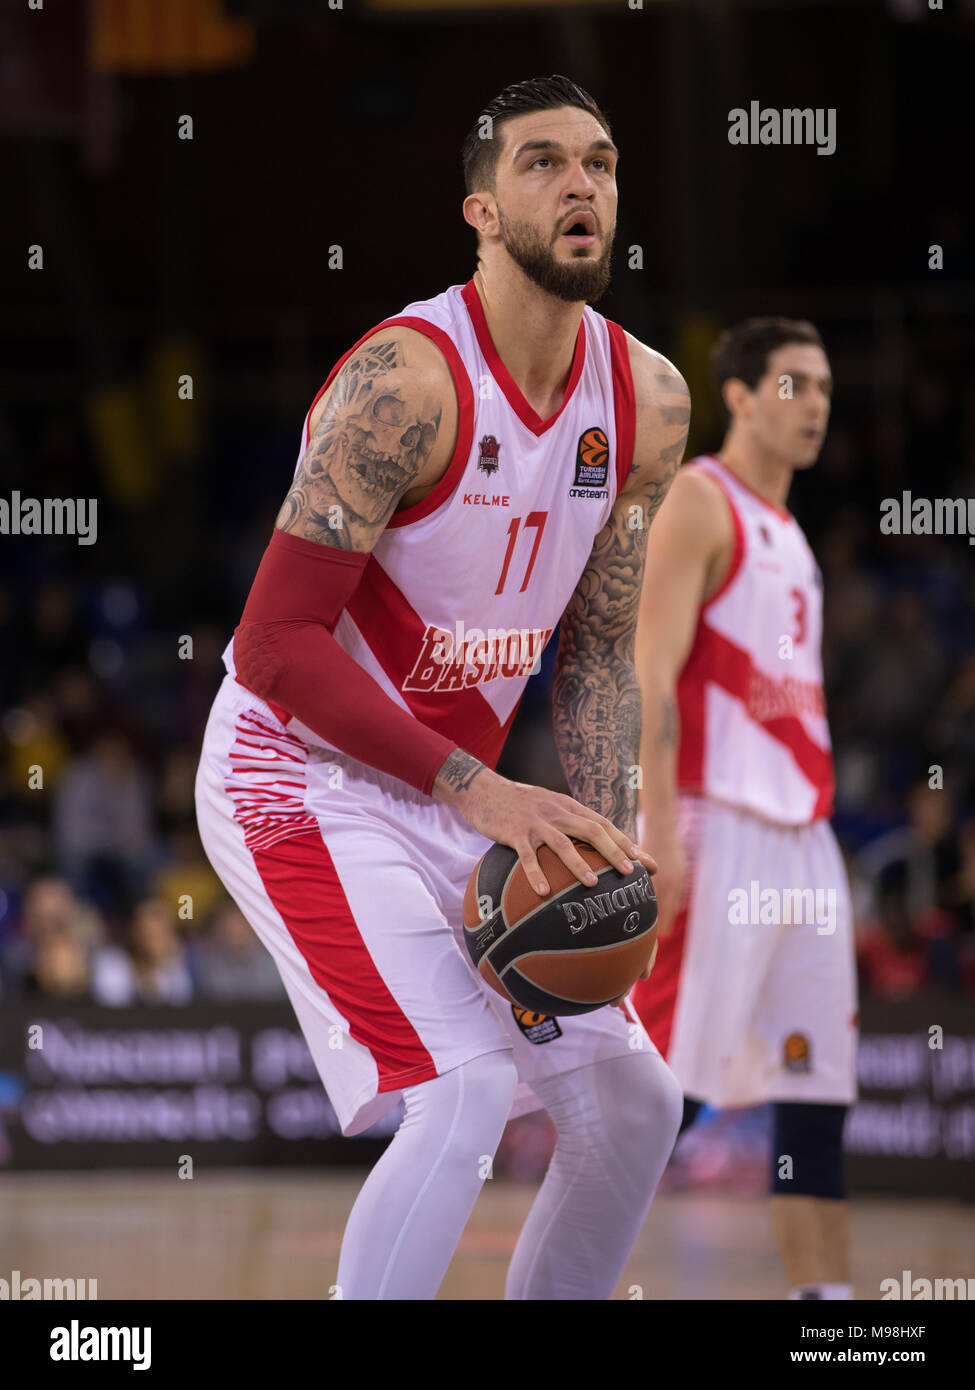 Barcelona, Spain. 23rd Mar, 2018. Vincent Poirier, #17 of Baskonia in  action during the 2017/2018 Turkish Airlines EuroLeague Regular Season  Round 28 game between FC Barcelona Lassa and Baskonia at Palau Blaugrana